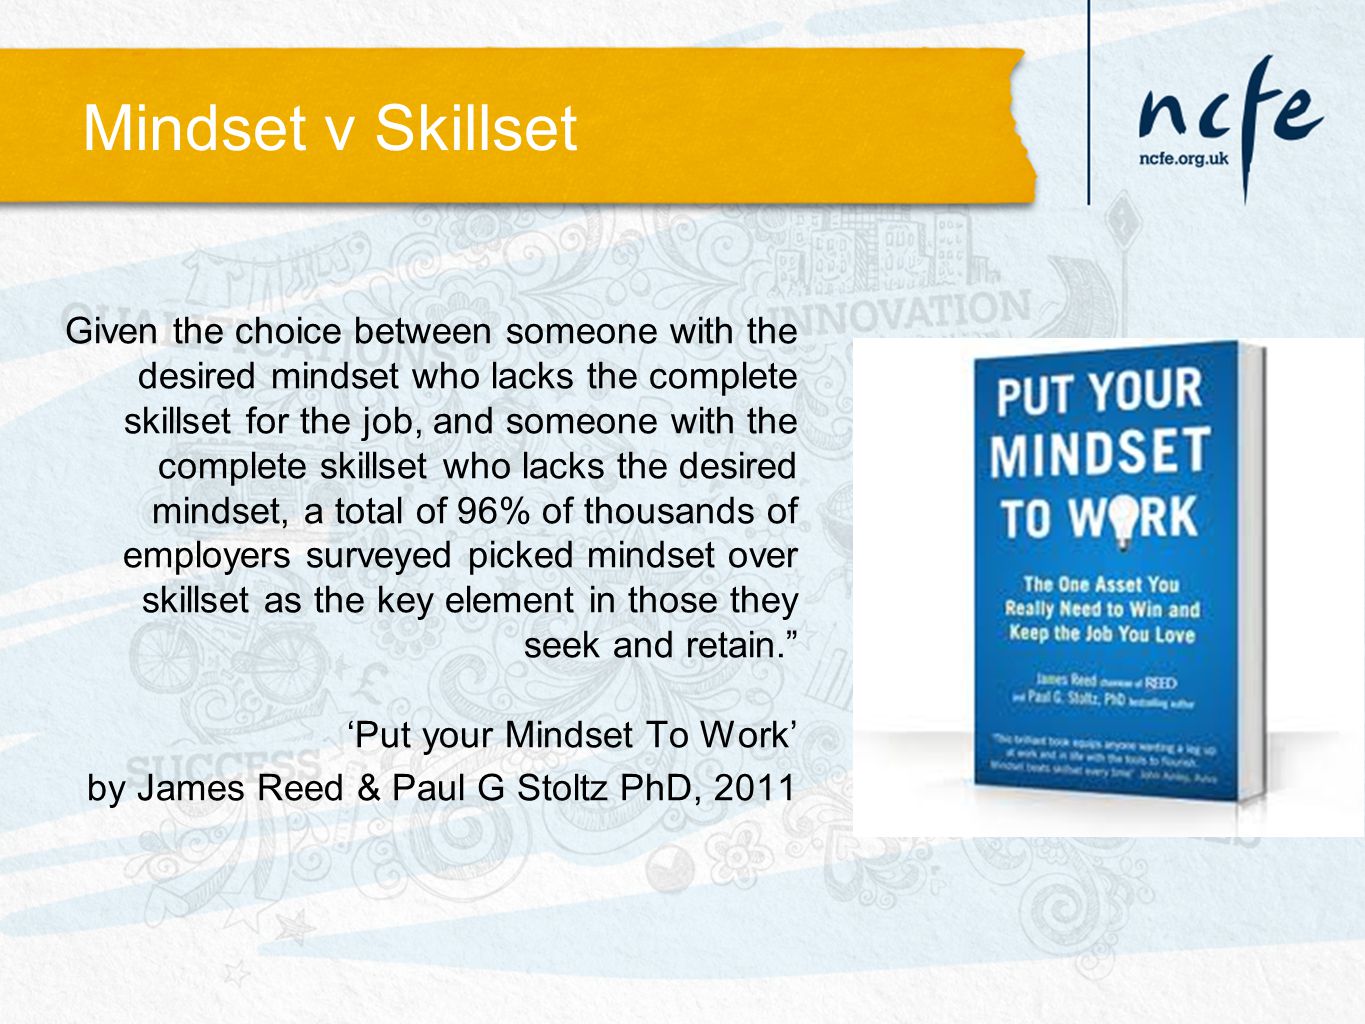 Mindset v Skillset Given the choice between someone with the desired mindset who lacks the complete skillset for the job, and someone with the complete skillset who lacks the desired mindset, a total of 96% of thousands of employers surveyed picked mindset over skillset as the key element in those they seek and retain. ‘Put your Mindset To Work’ by James Reed & Paul G Stoltz PhD, 2011